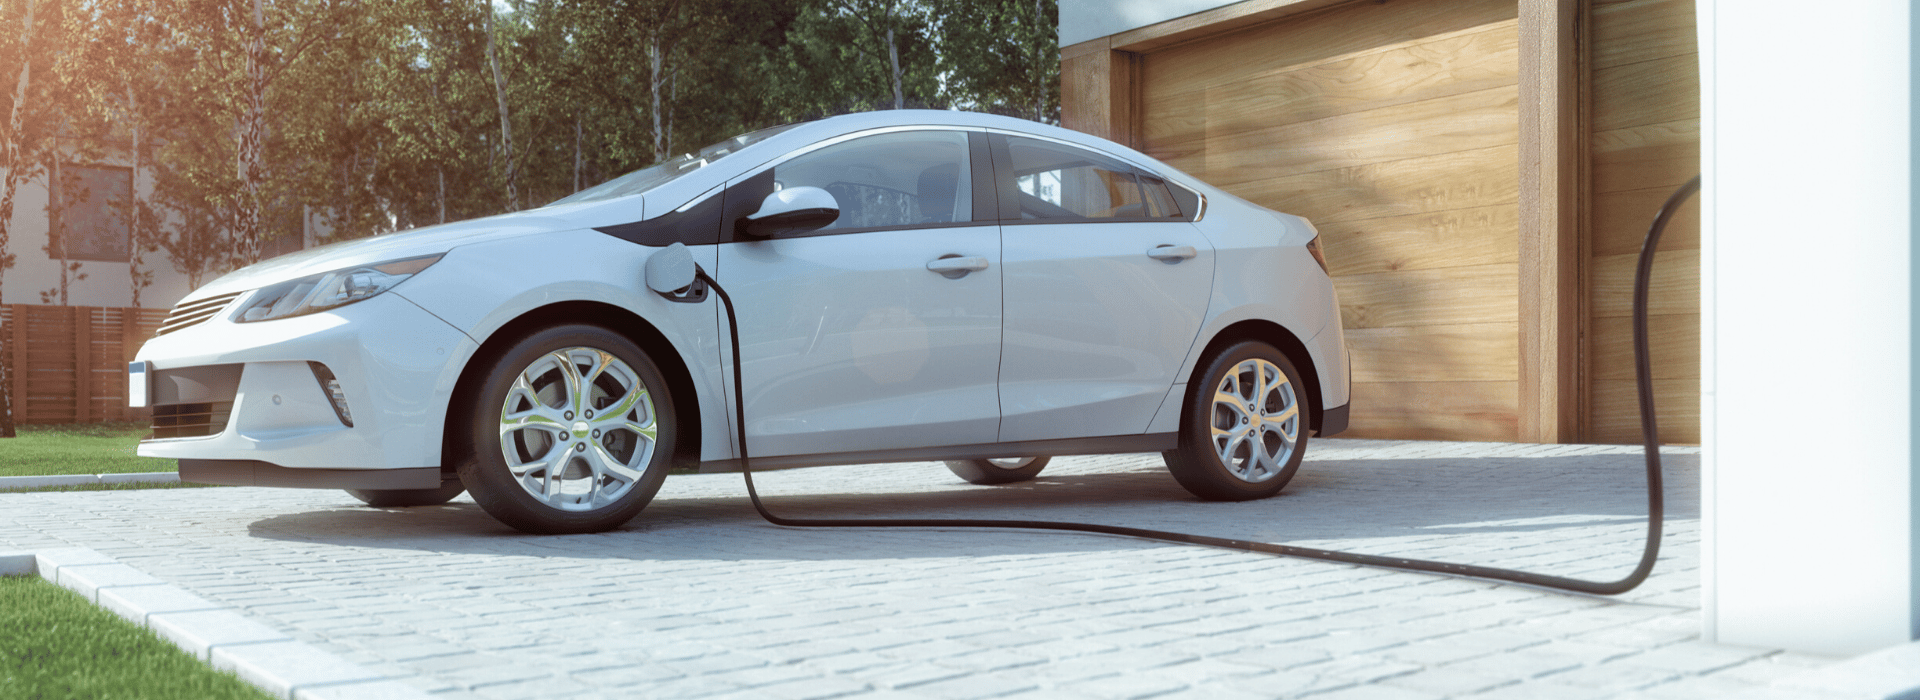 5 Reasons Why You Should Buy an Electric Vehicle in 2020